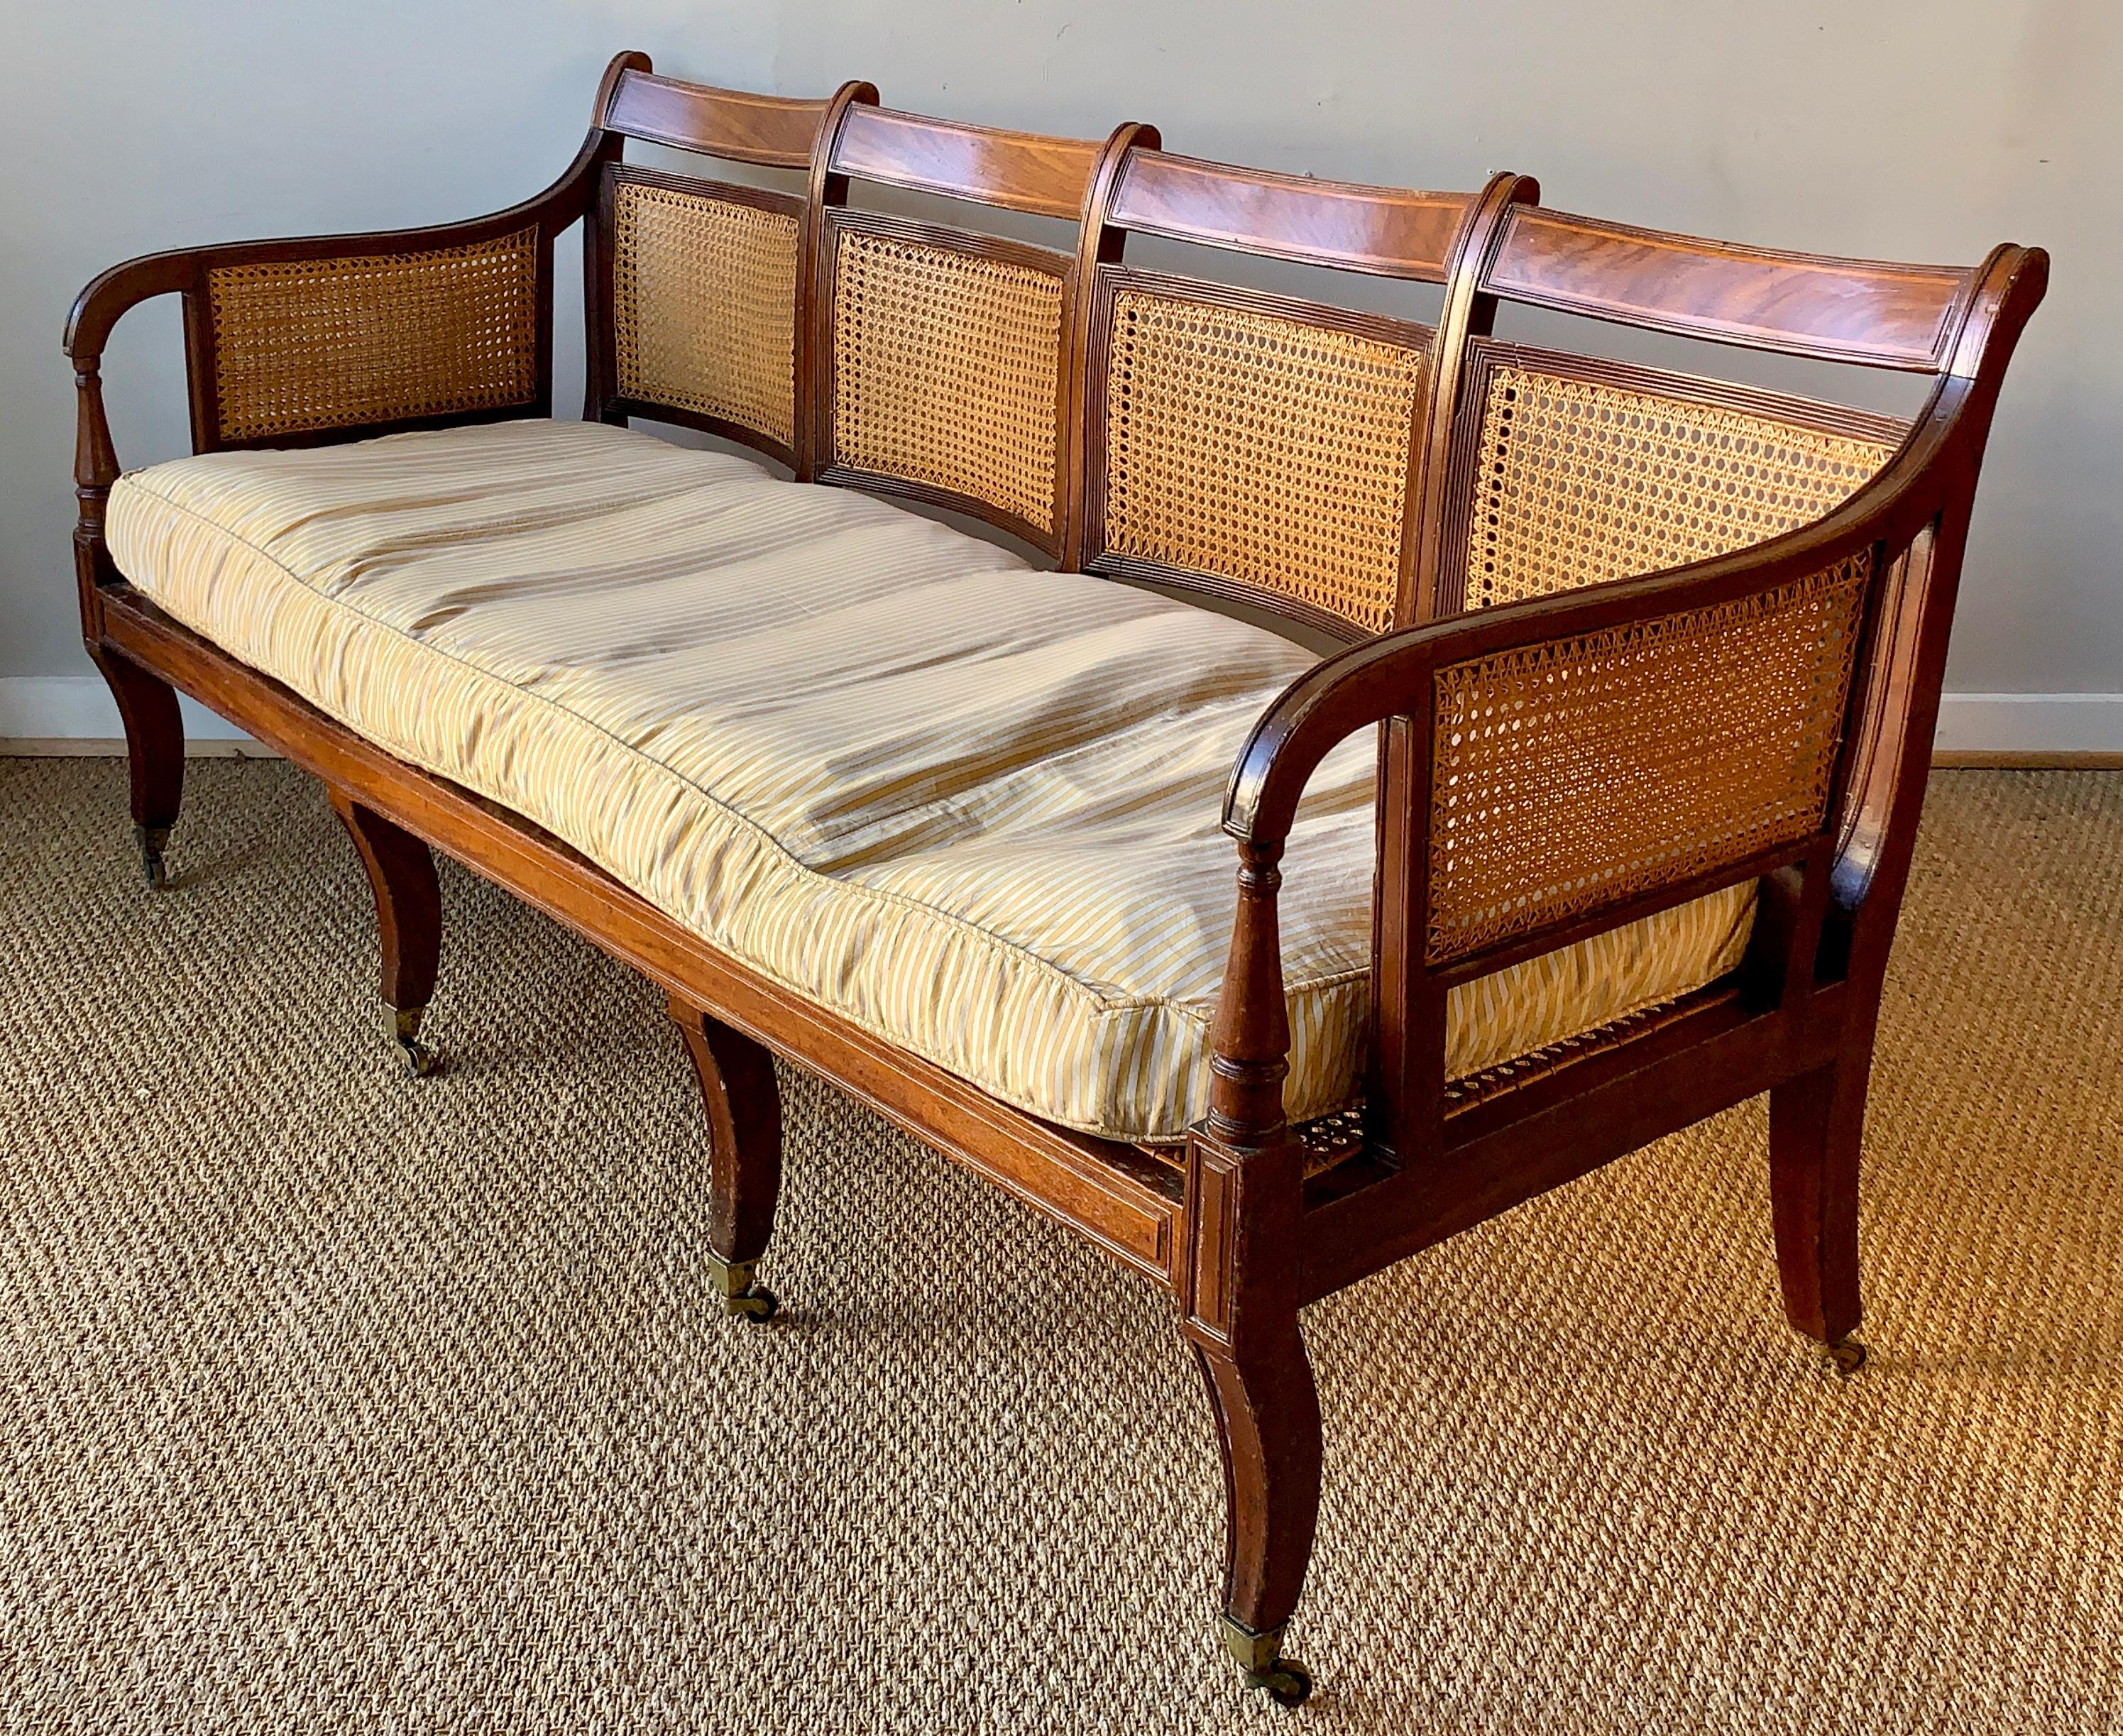 An early 19th century English mahogany and satinwood settee with cane back, seat and arms with custom down filled cushion.